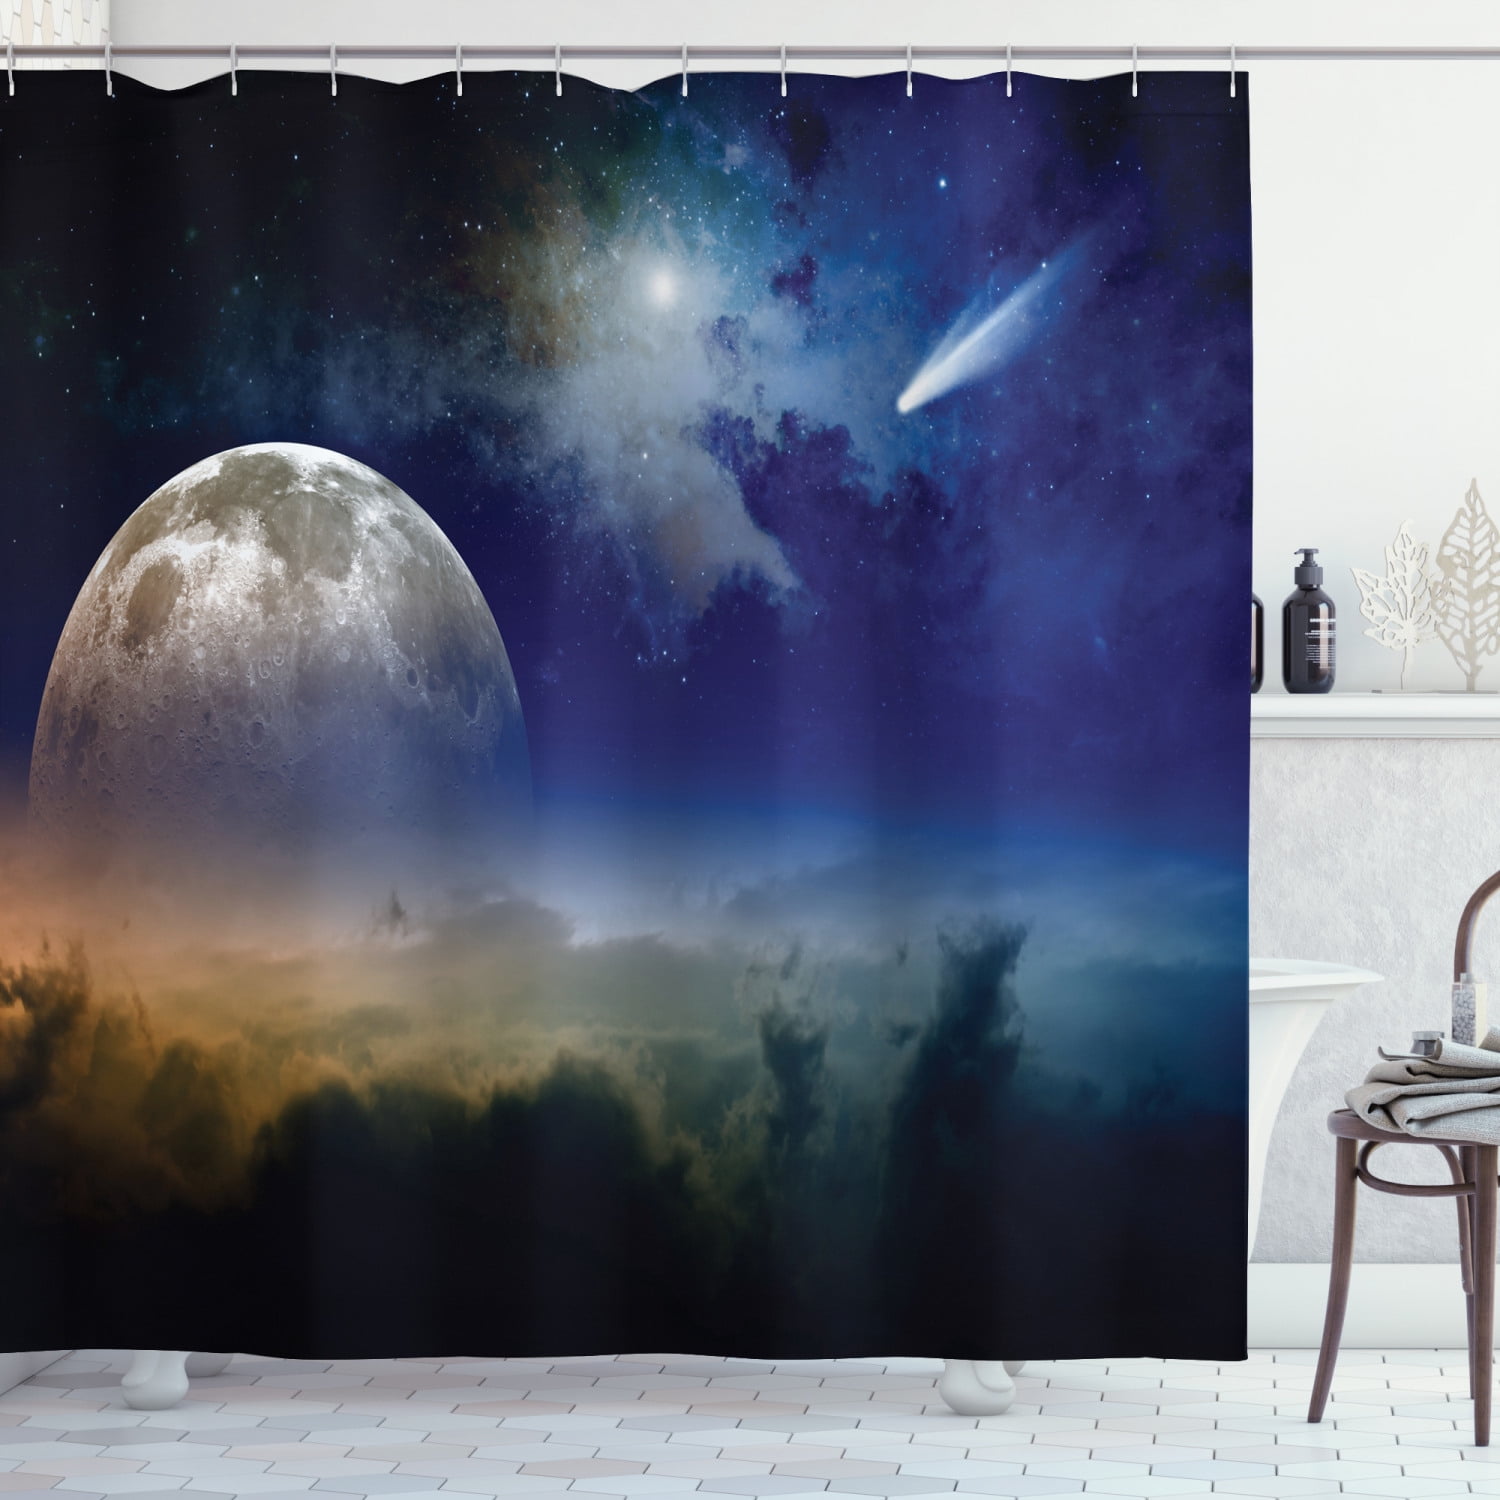 Details about   Outer Space Fantasy Meteor Rain Wooden Dock Sunlight Print Fabric Shower Curtain 